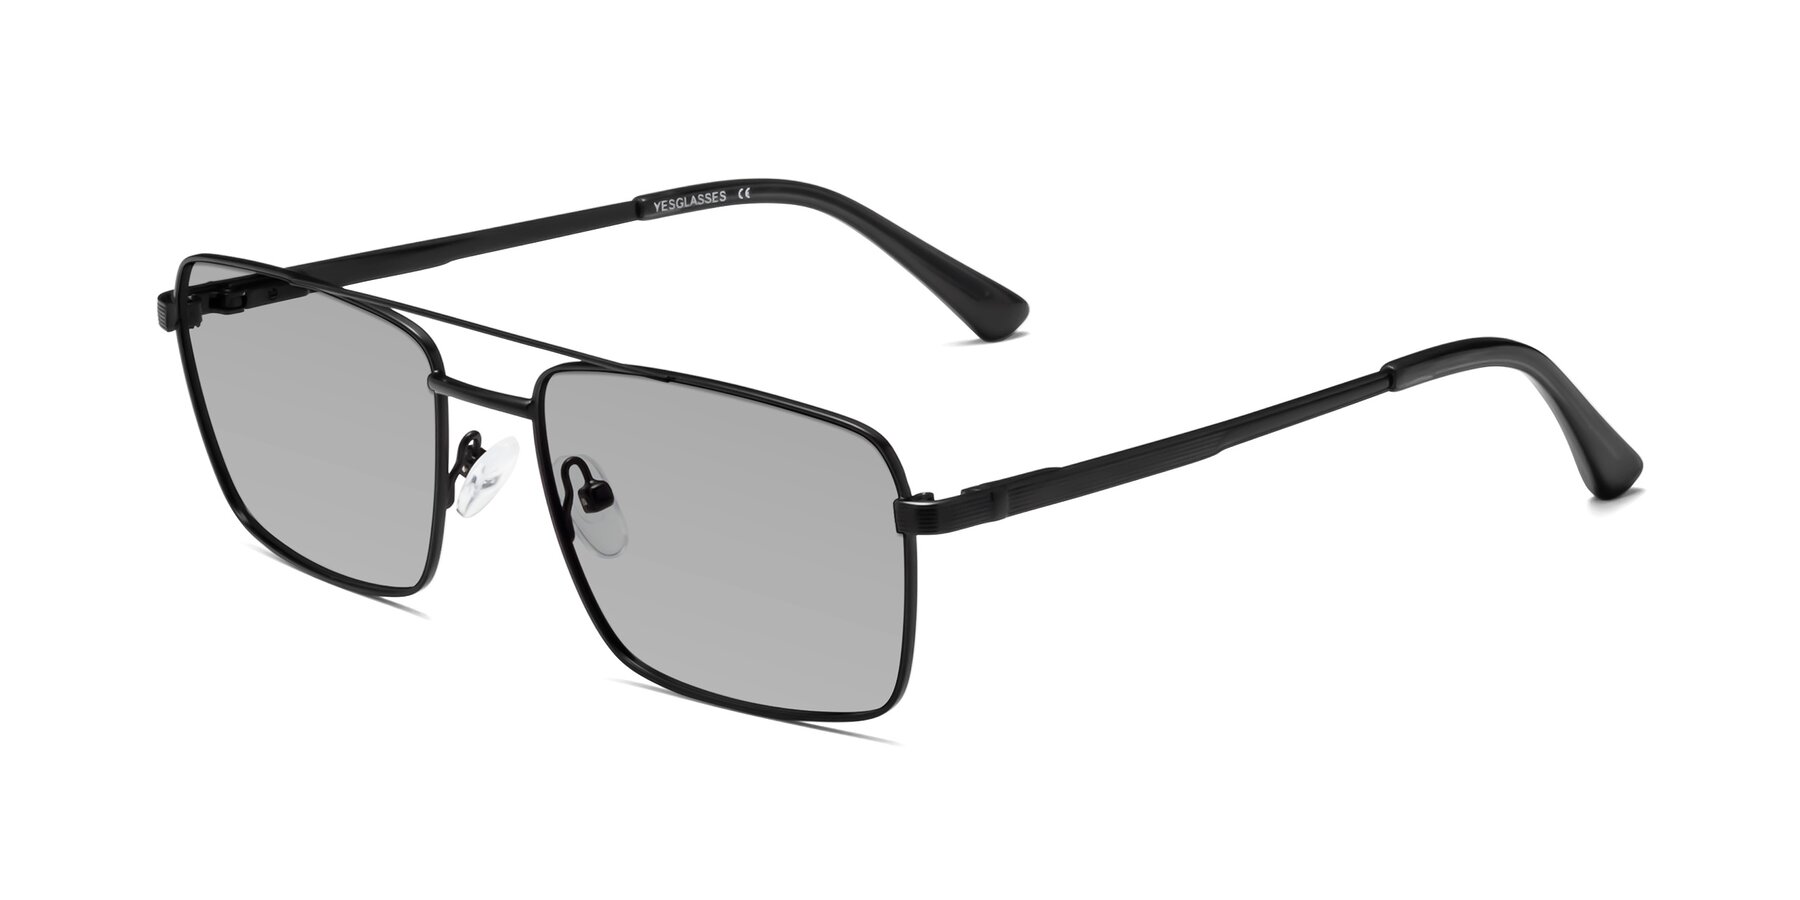 Angle of Beckum in Black with Light Gray Tinted Lenses